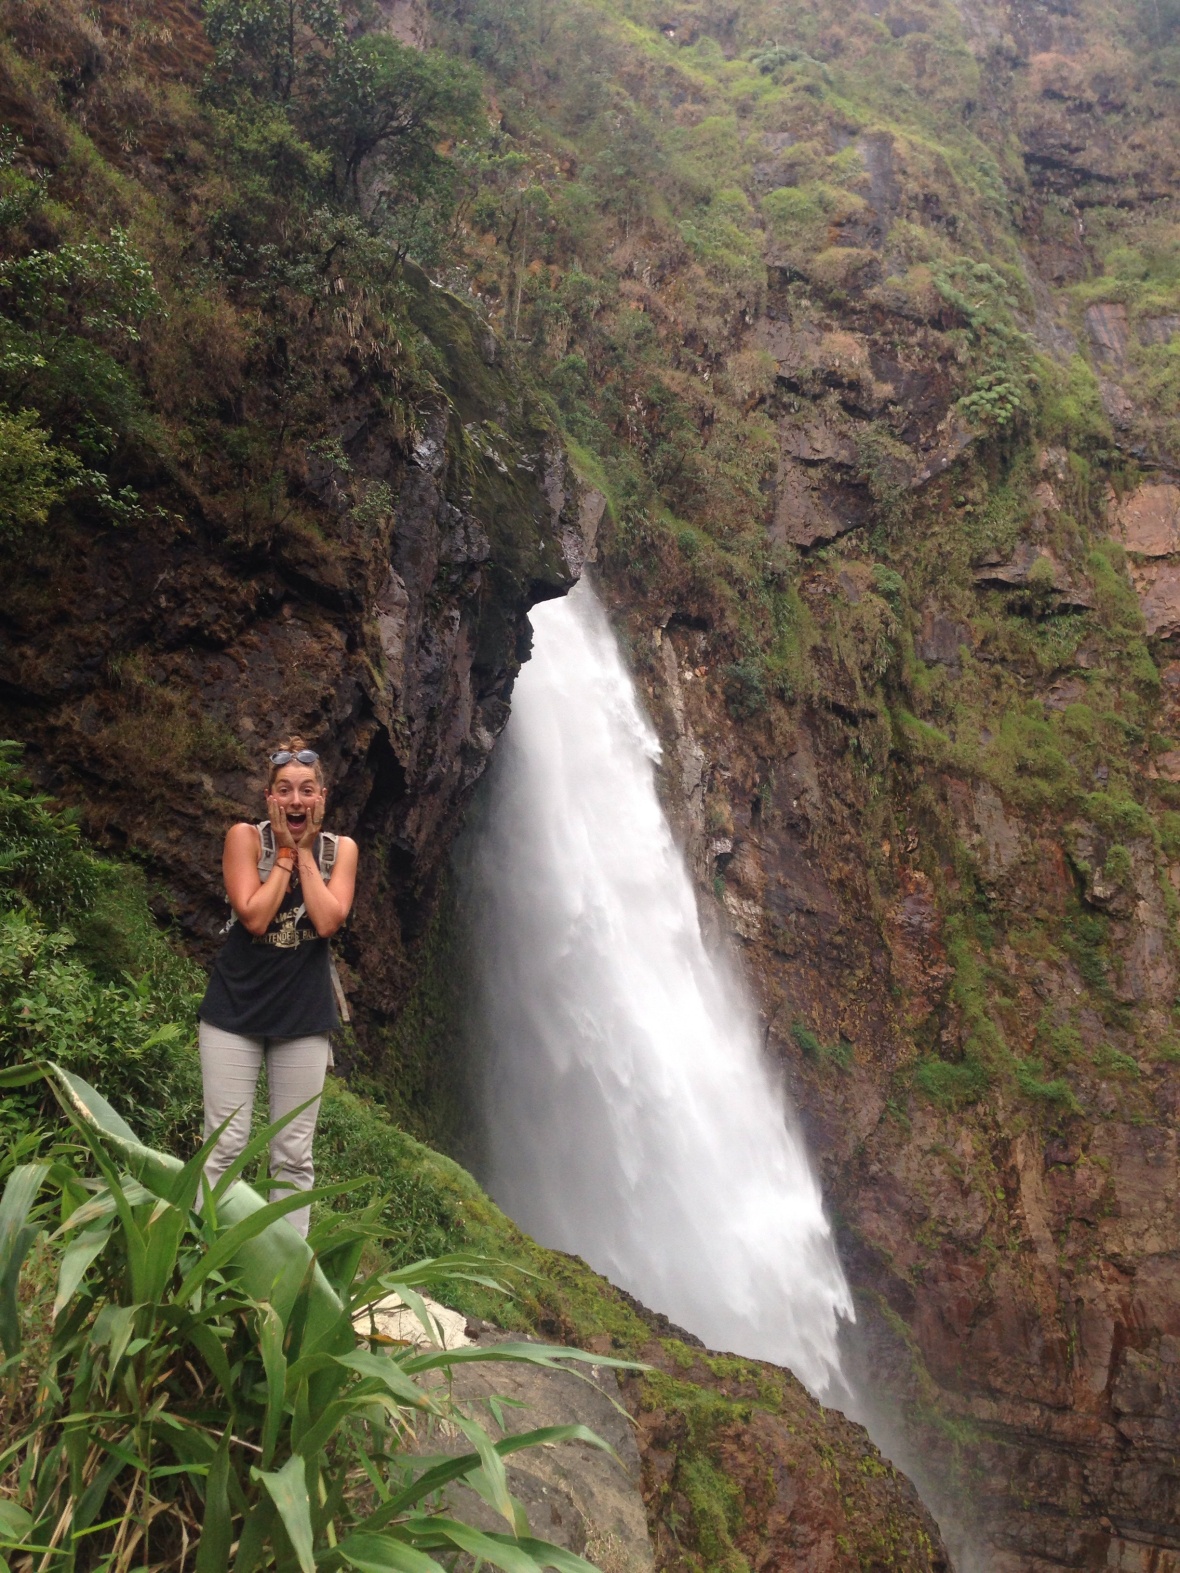 When we finally got to the waterfall, we realized just how huge and epic it was...